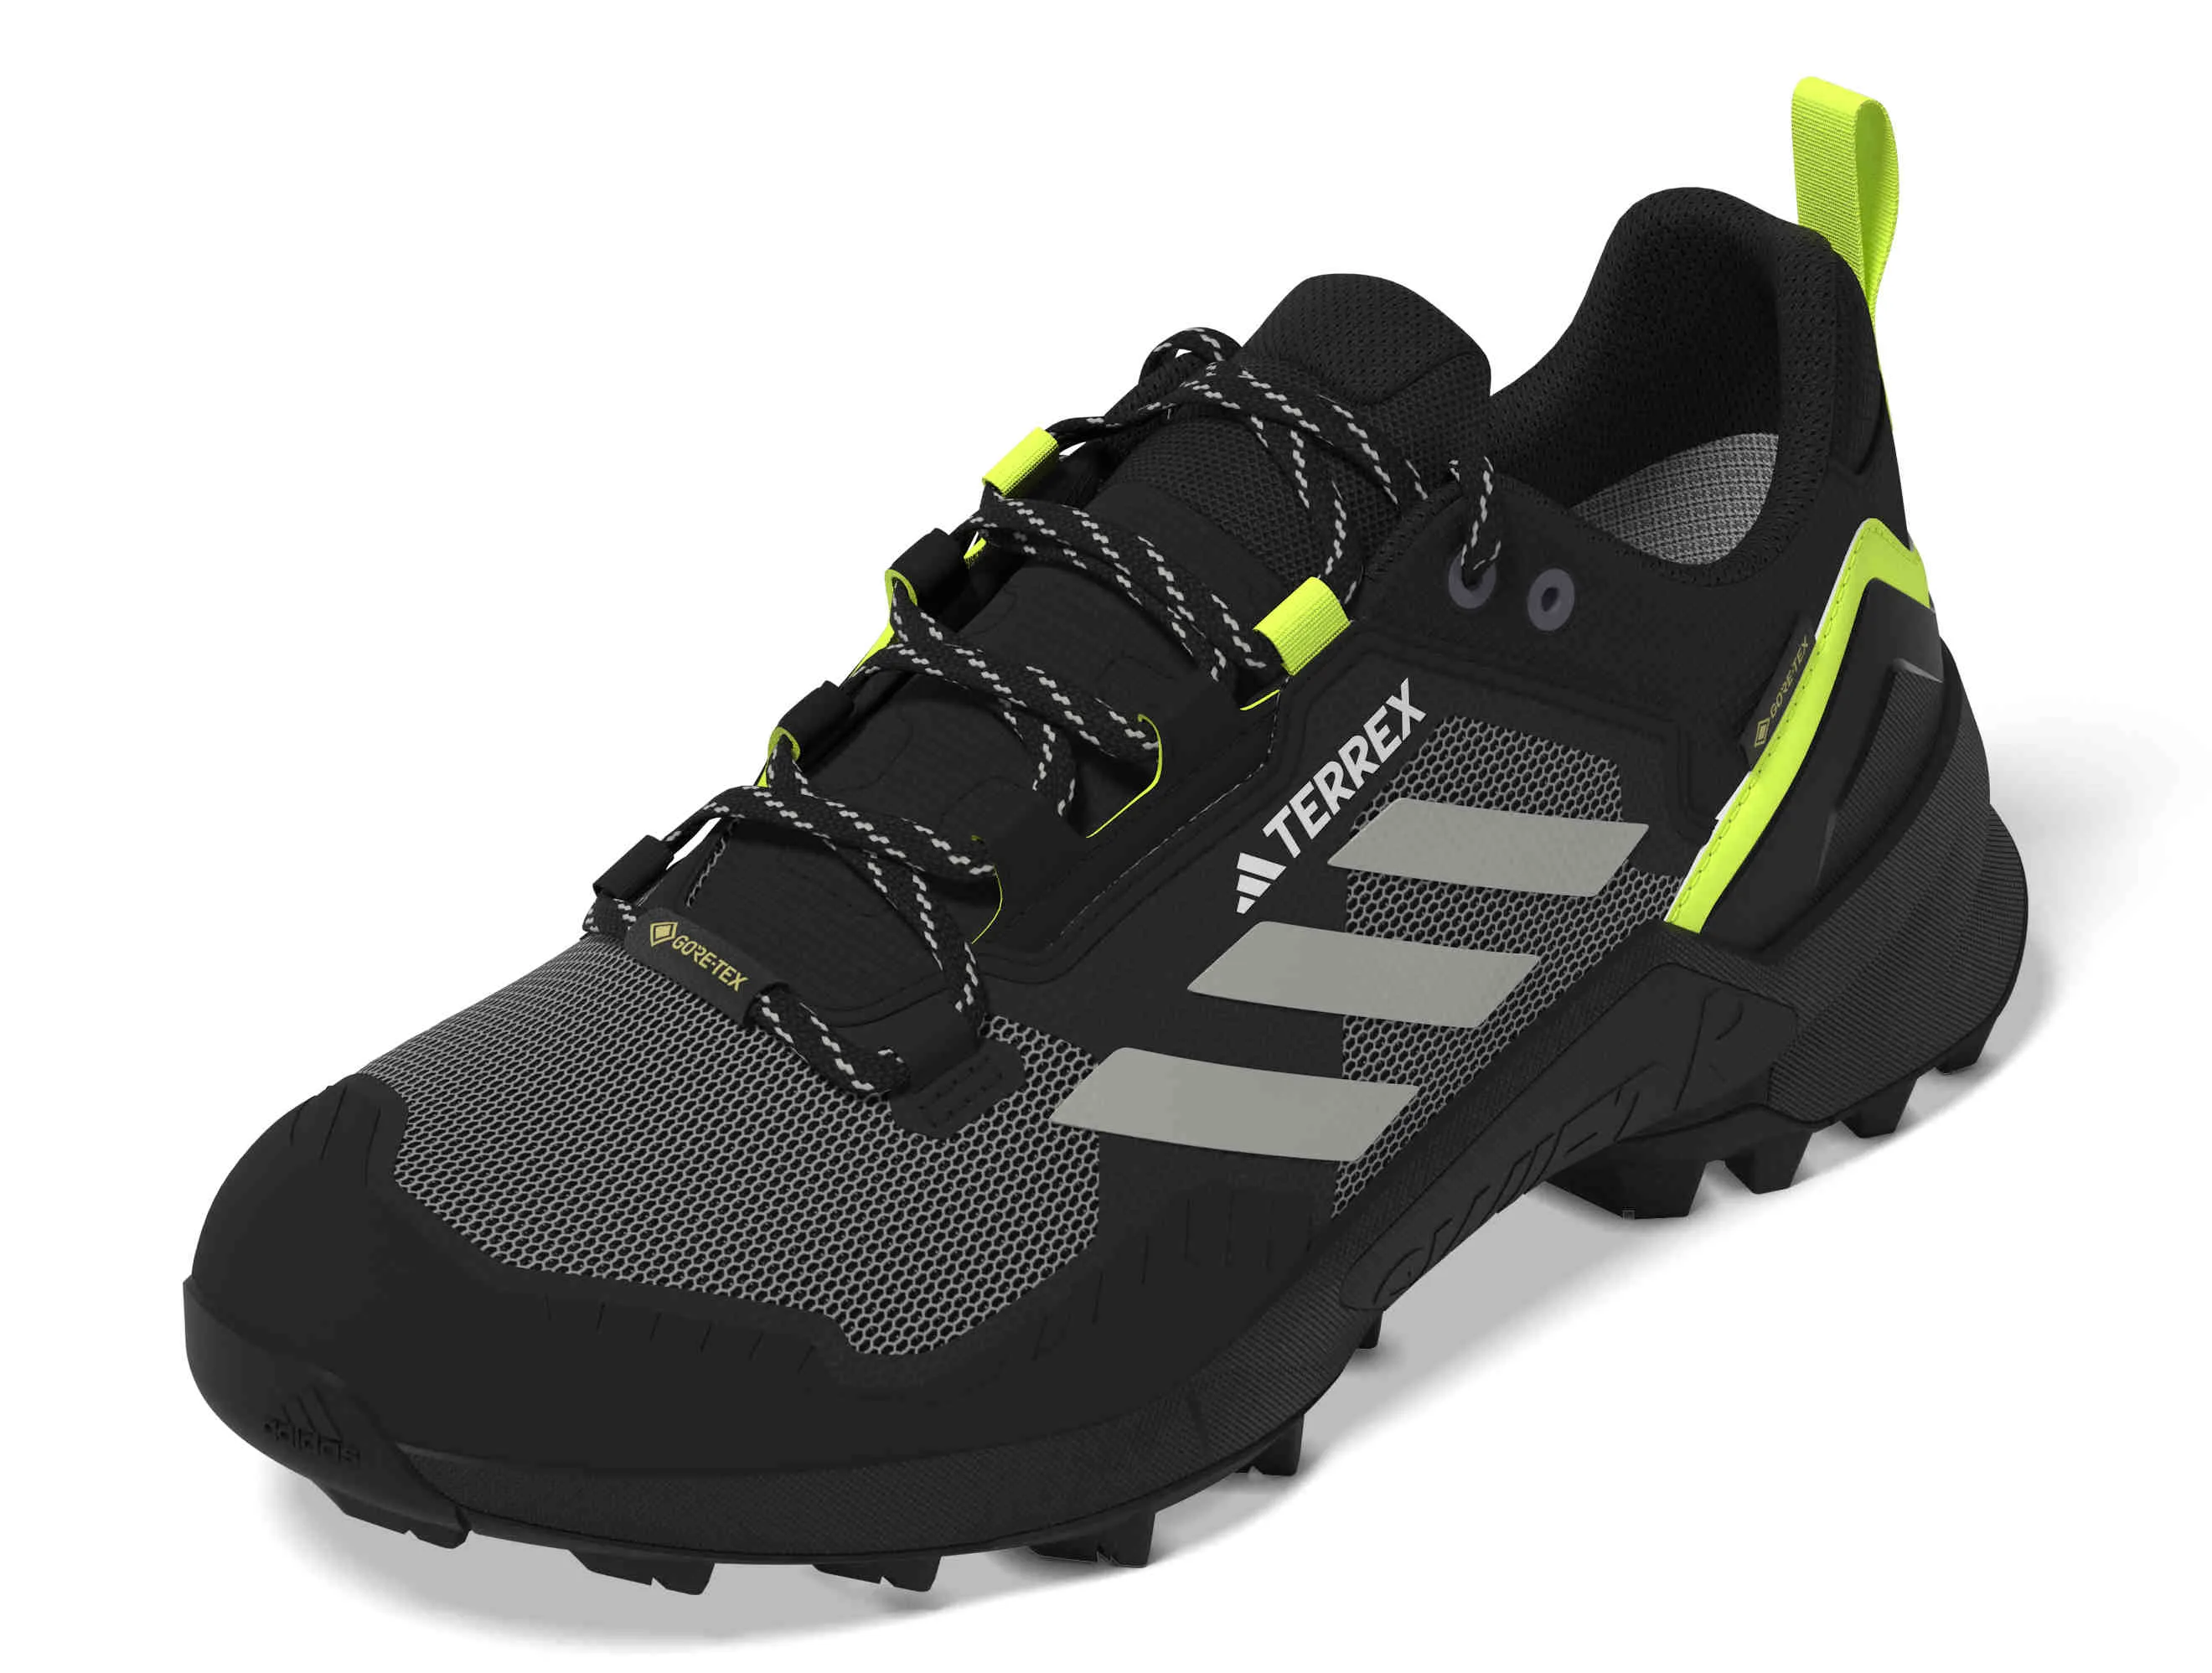 IF2408_13_FOOTWEAR_3D - Rendering_Side Lateral Left View_transparent.jpg